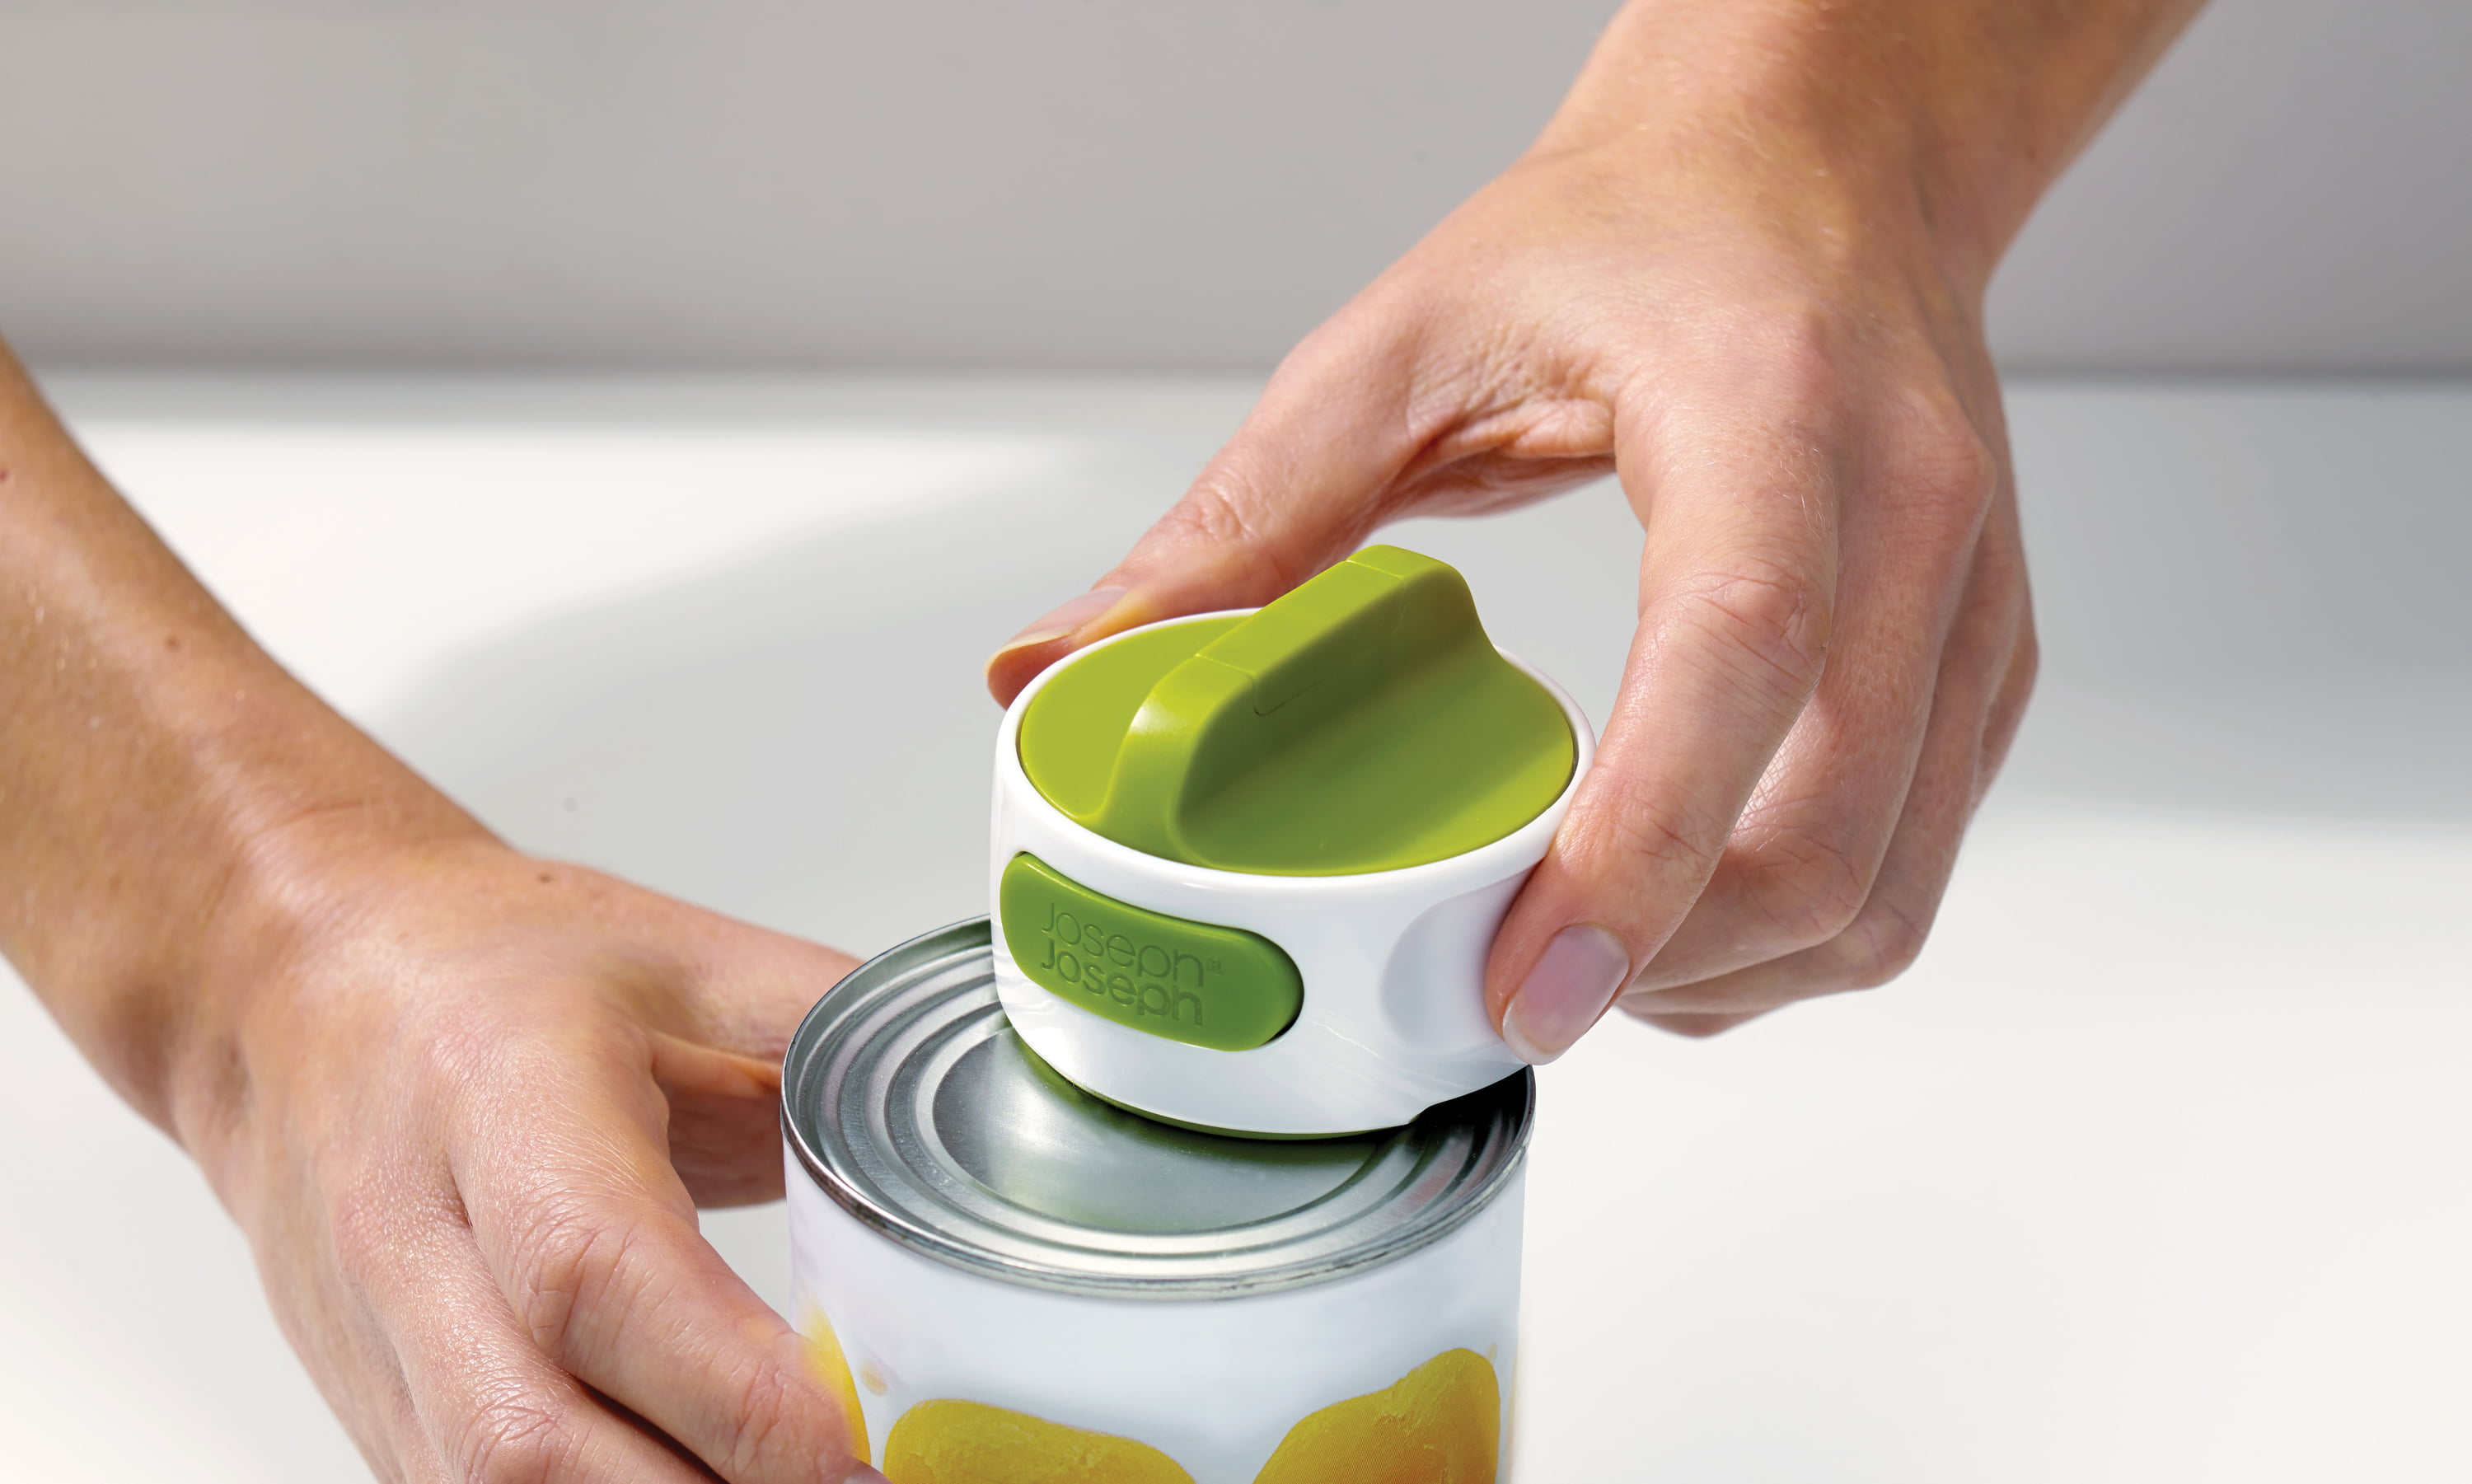 Easy & Safety Can Opener – DR. SAVE